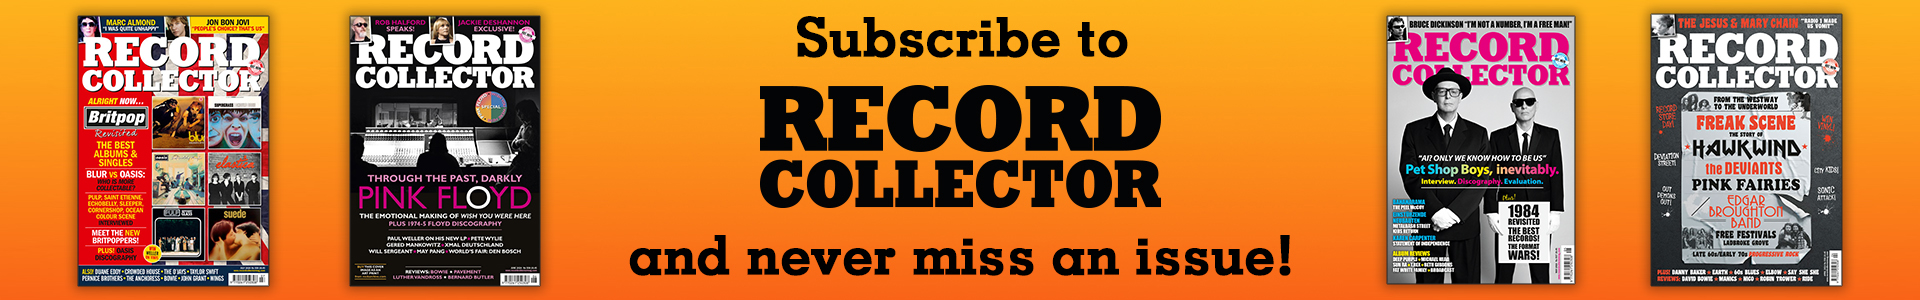 Subscribe to Record Collector